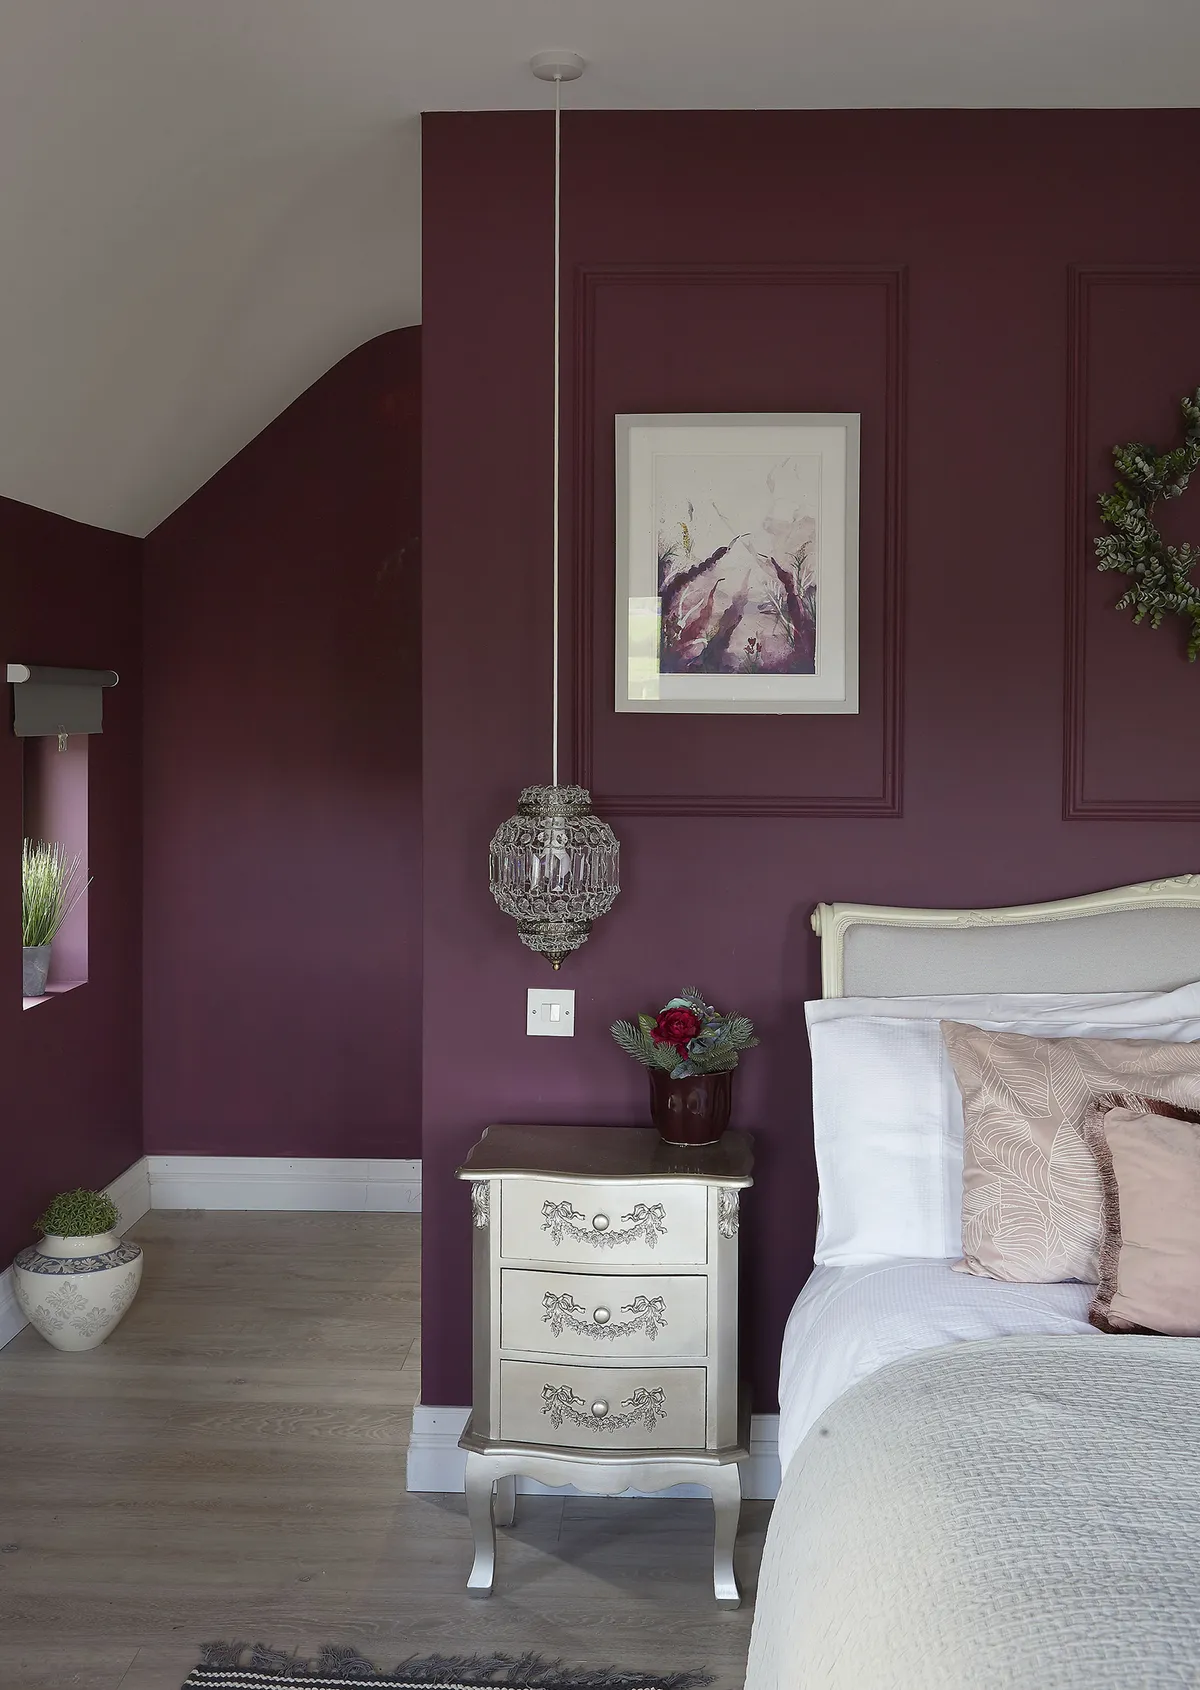 Inspired by the panelling created by Seamus in the main bedroom, Gillian chose ornate furniture and glass pendants to create a period-inspired look